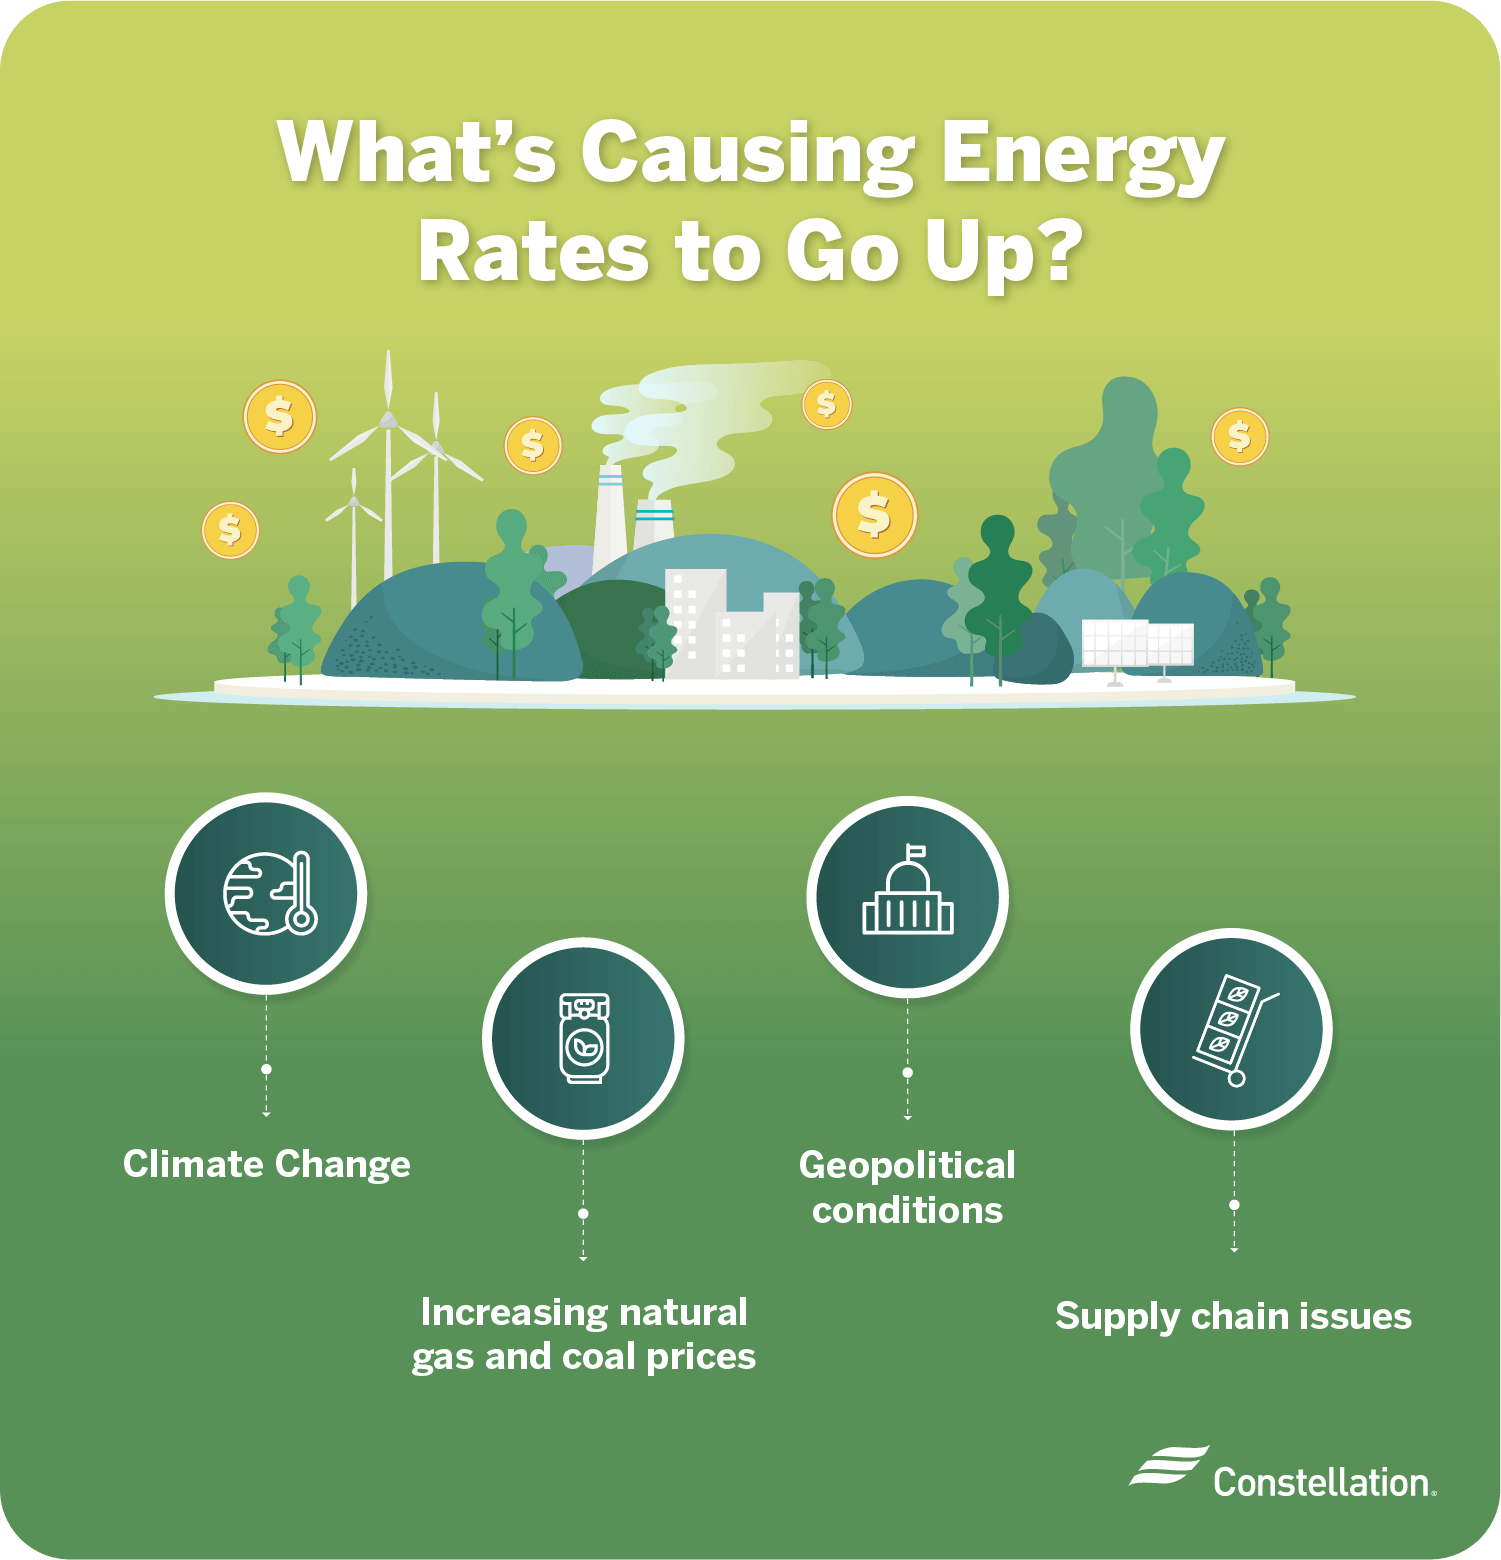 What’s causing energy rates to go up?